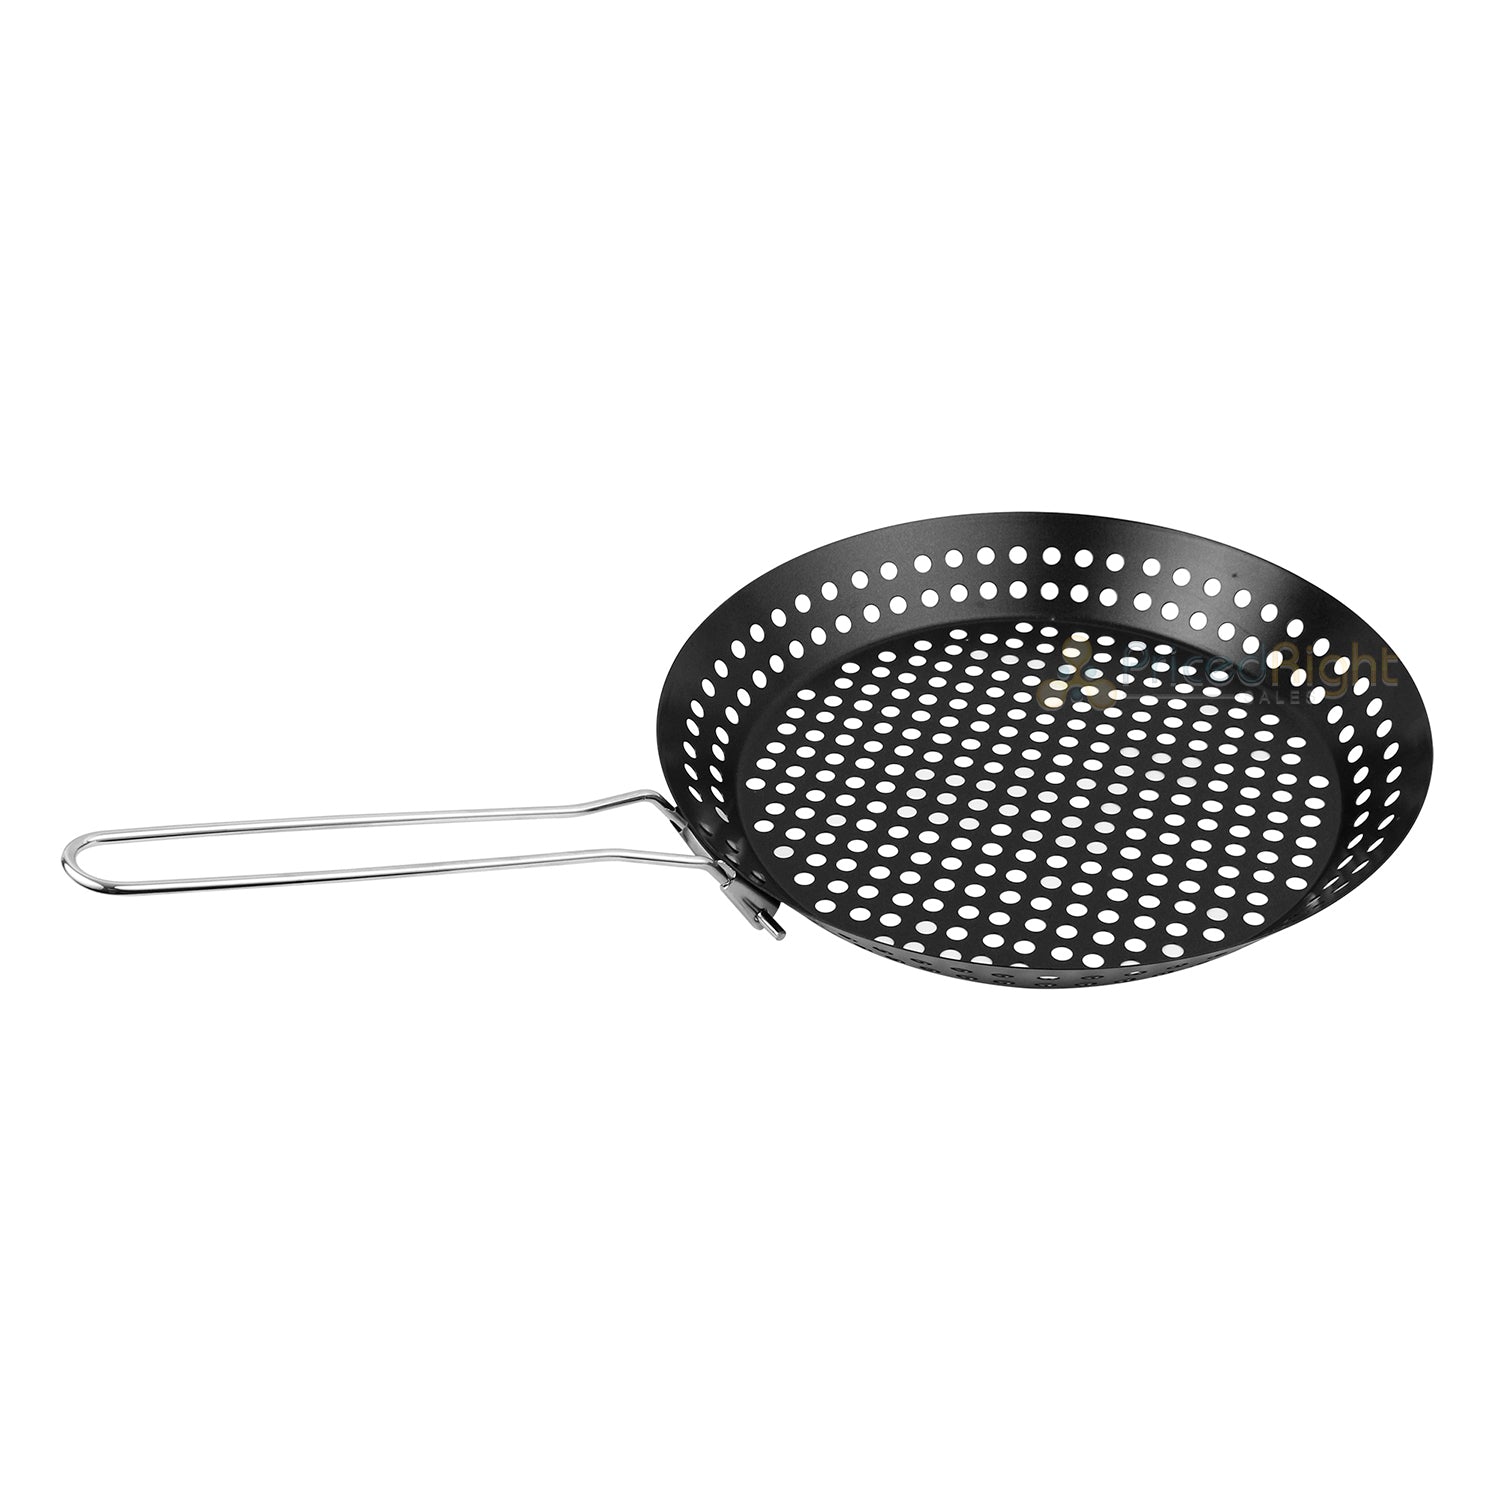 Mr Bar-B-Q Gourmet Grilling Topper 2 Piece Set Non-Stick With Folding Handle